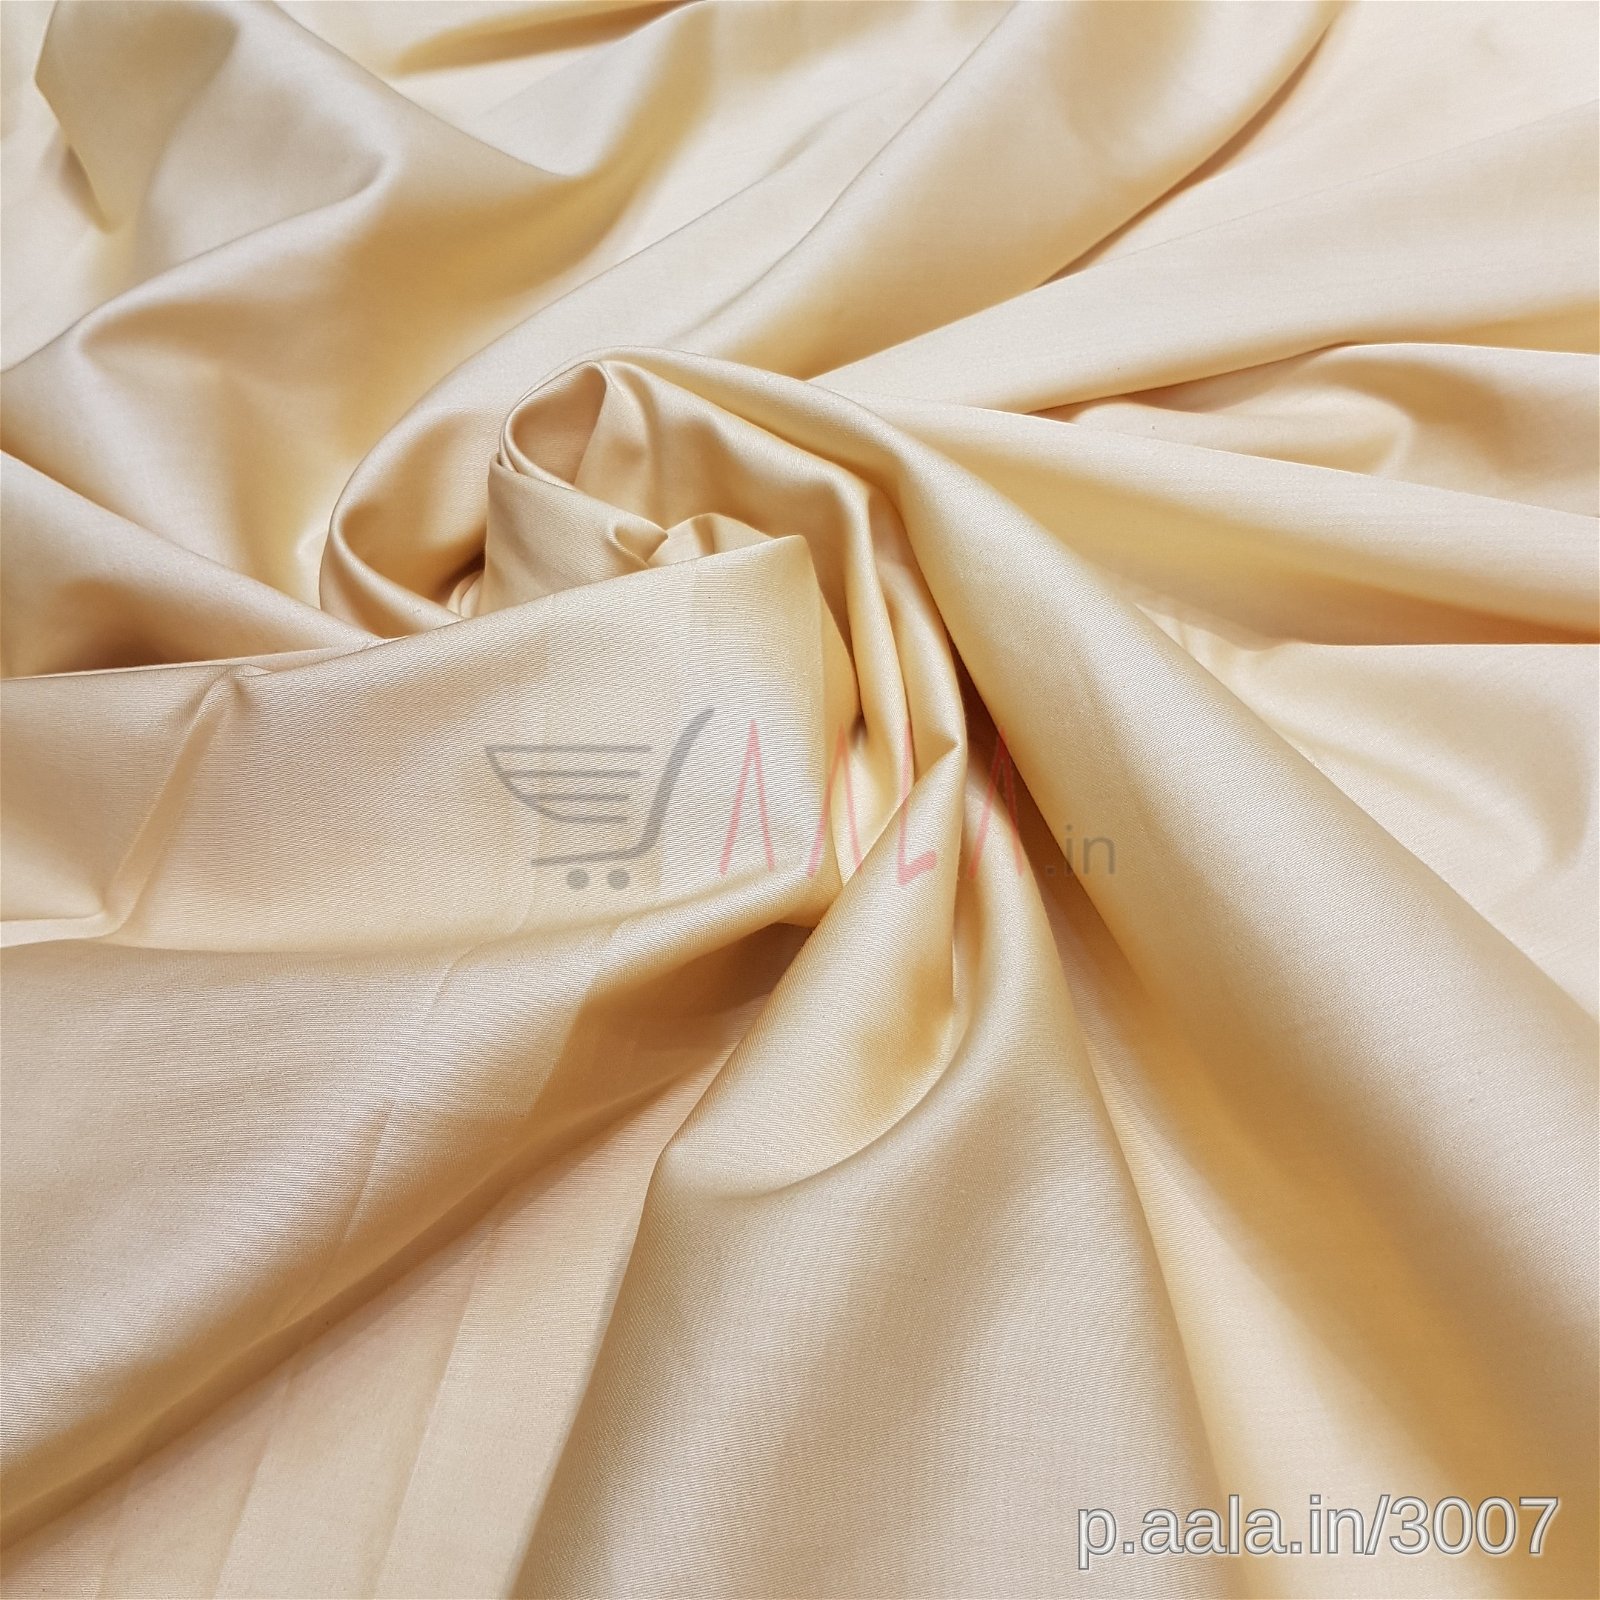 Satin Cotton 44 Inches Dyed Per Metre #3007